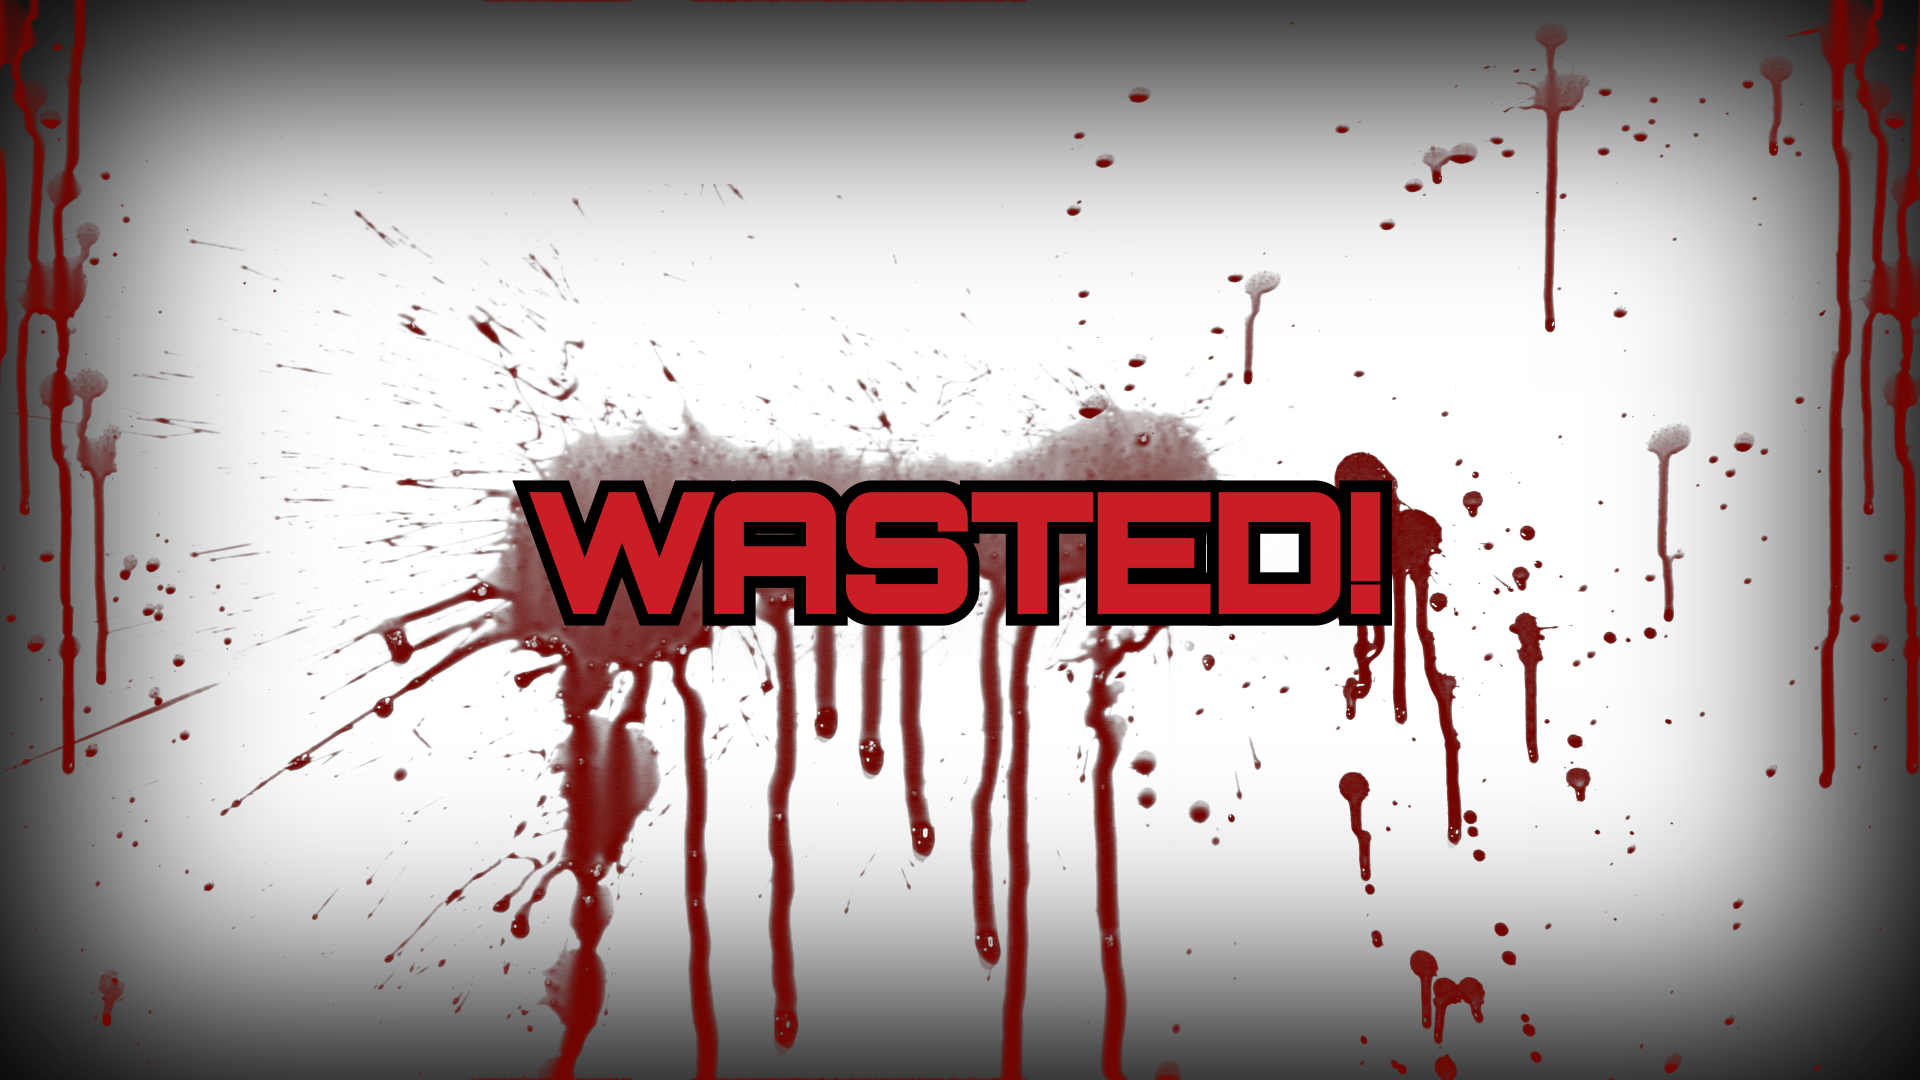 Wasted Full Screen Effect. FootageCrate FX Archives